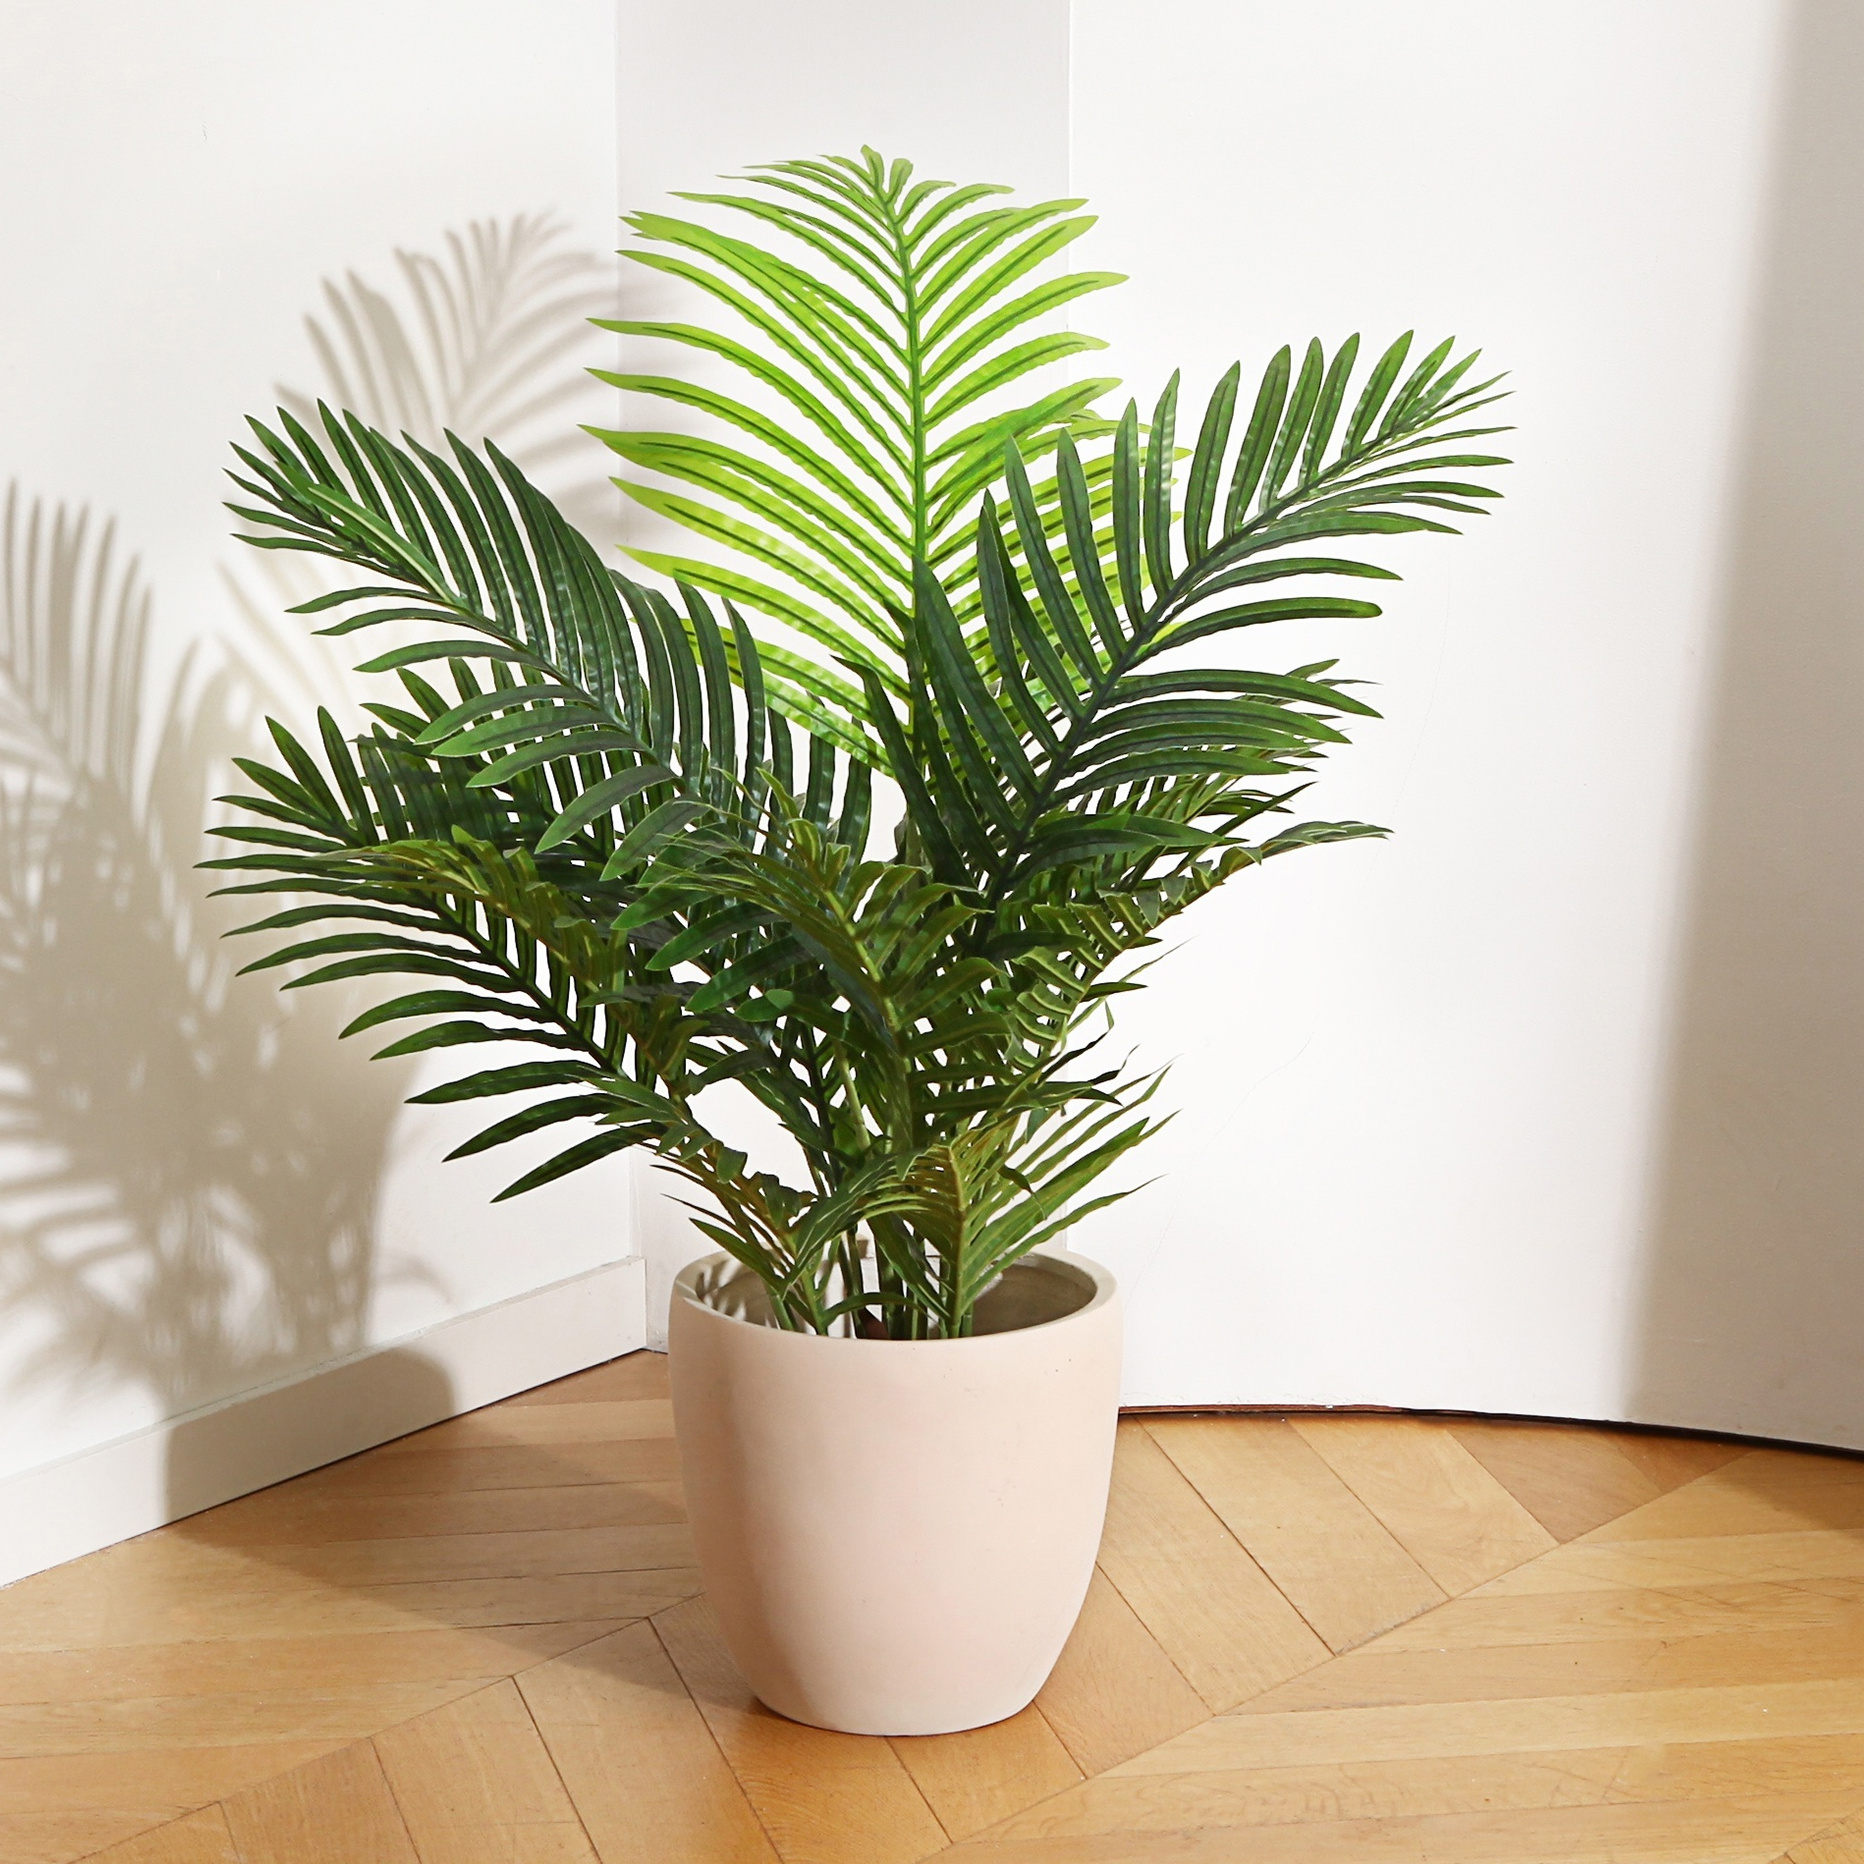 

Artificial Plant- 3ft Fake Tropical Tree With Real Touch Fake Leaves & Faux Fern Branch - Durable Palm Plant With Sturdy Base - For Home, Wedding, Parties, Housewarming Gift, 1pc